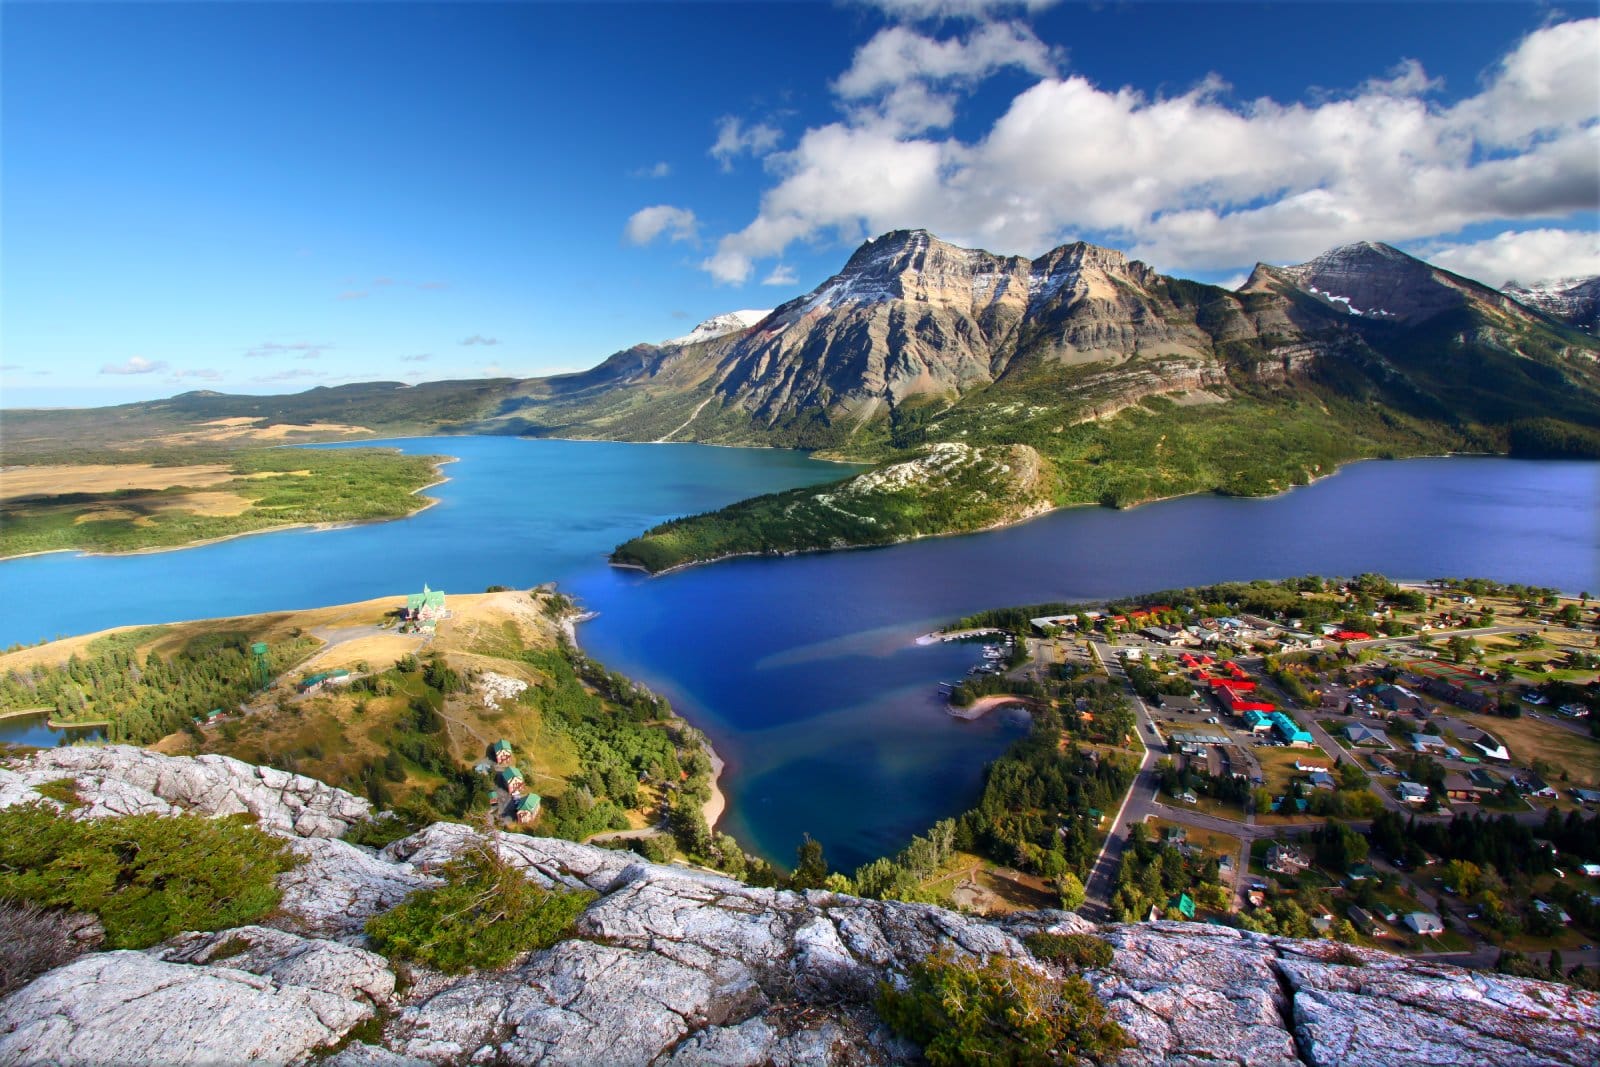 <p class="wp-caption-text">Image Credit: Shutterstock / Jason Patrick Ross</p>  <p><span>Waterton Lakes National Park, where the prairies meet the mountains, offers a unique blend of landscapes, including rugged mountains, rolling grasslands, and serene lakes. The park is part of the Waterton-Glacier International Peace Park, a UNESCO World Heritage site it shares with Glacier National Park in Montana, USA. Highlights include the historic Prince of Wales Hotel, offering panoramic views of Waterton Lake, and the Red Rock Canyon, known for its striking red argillite rock formations.</span></p>